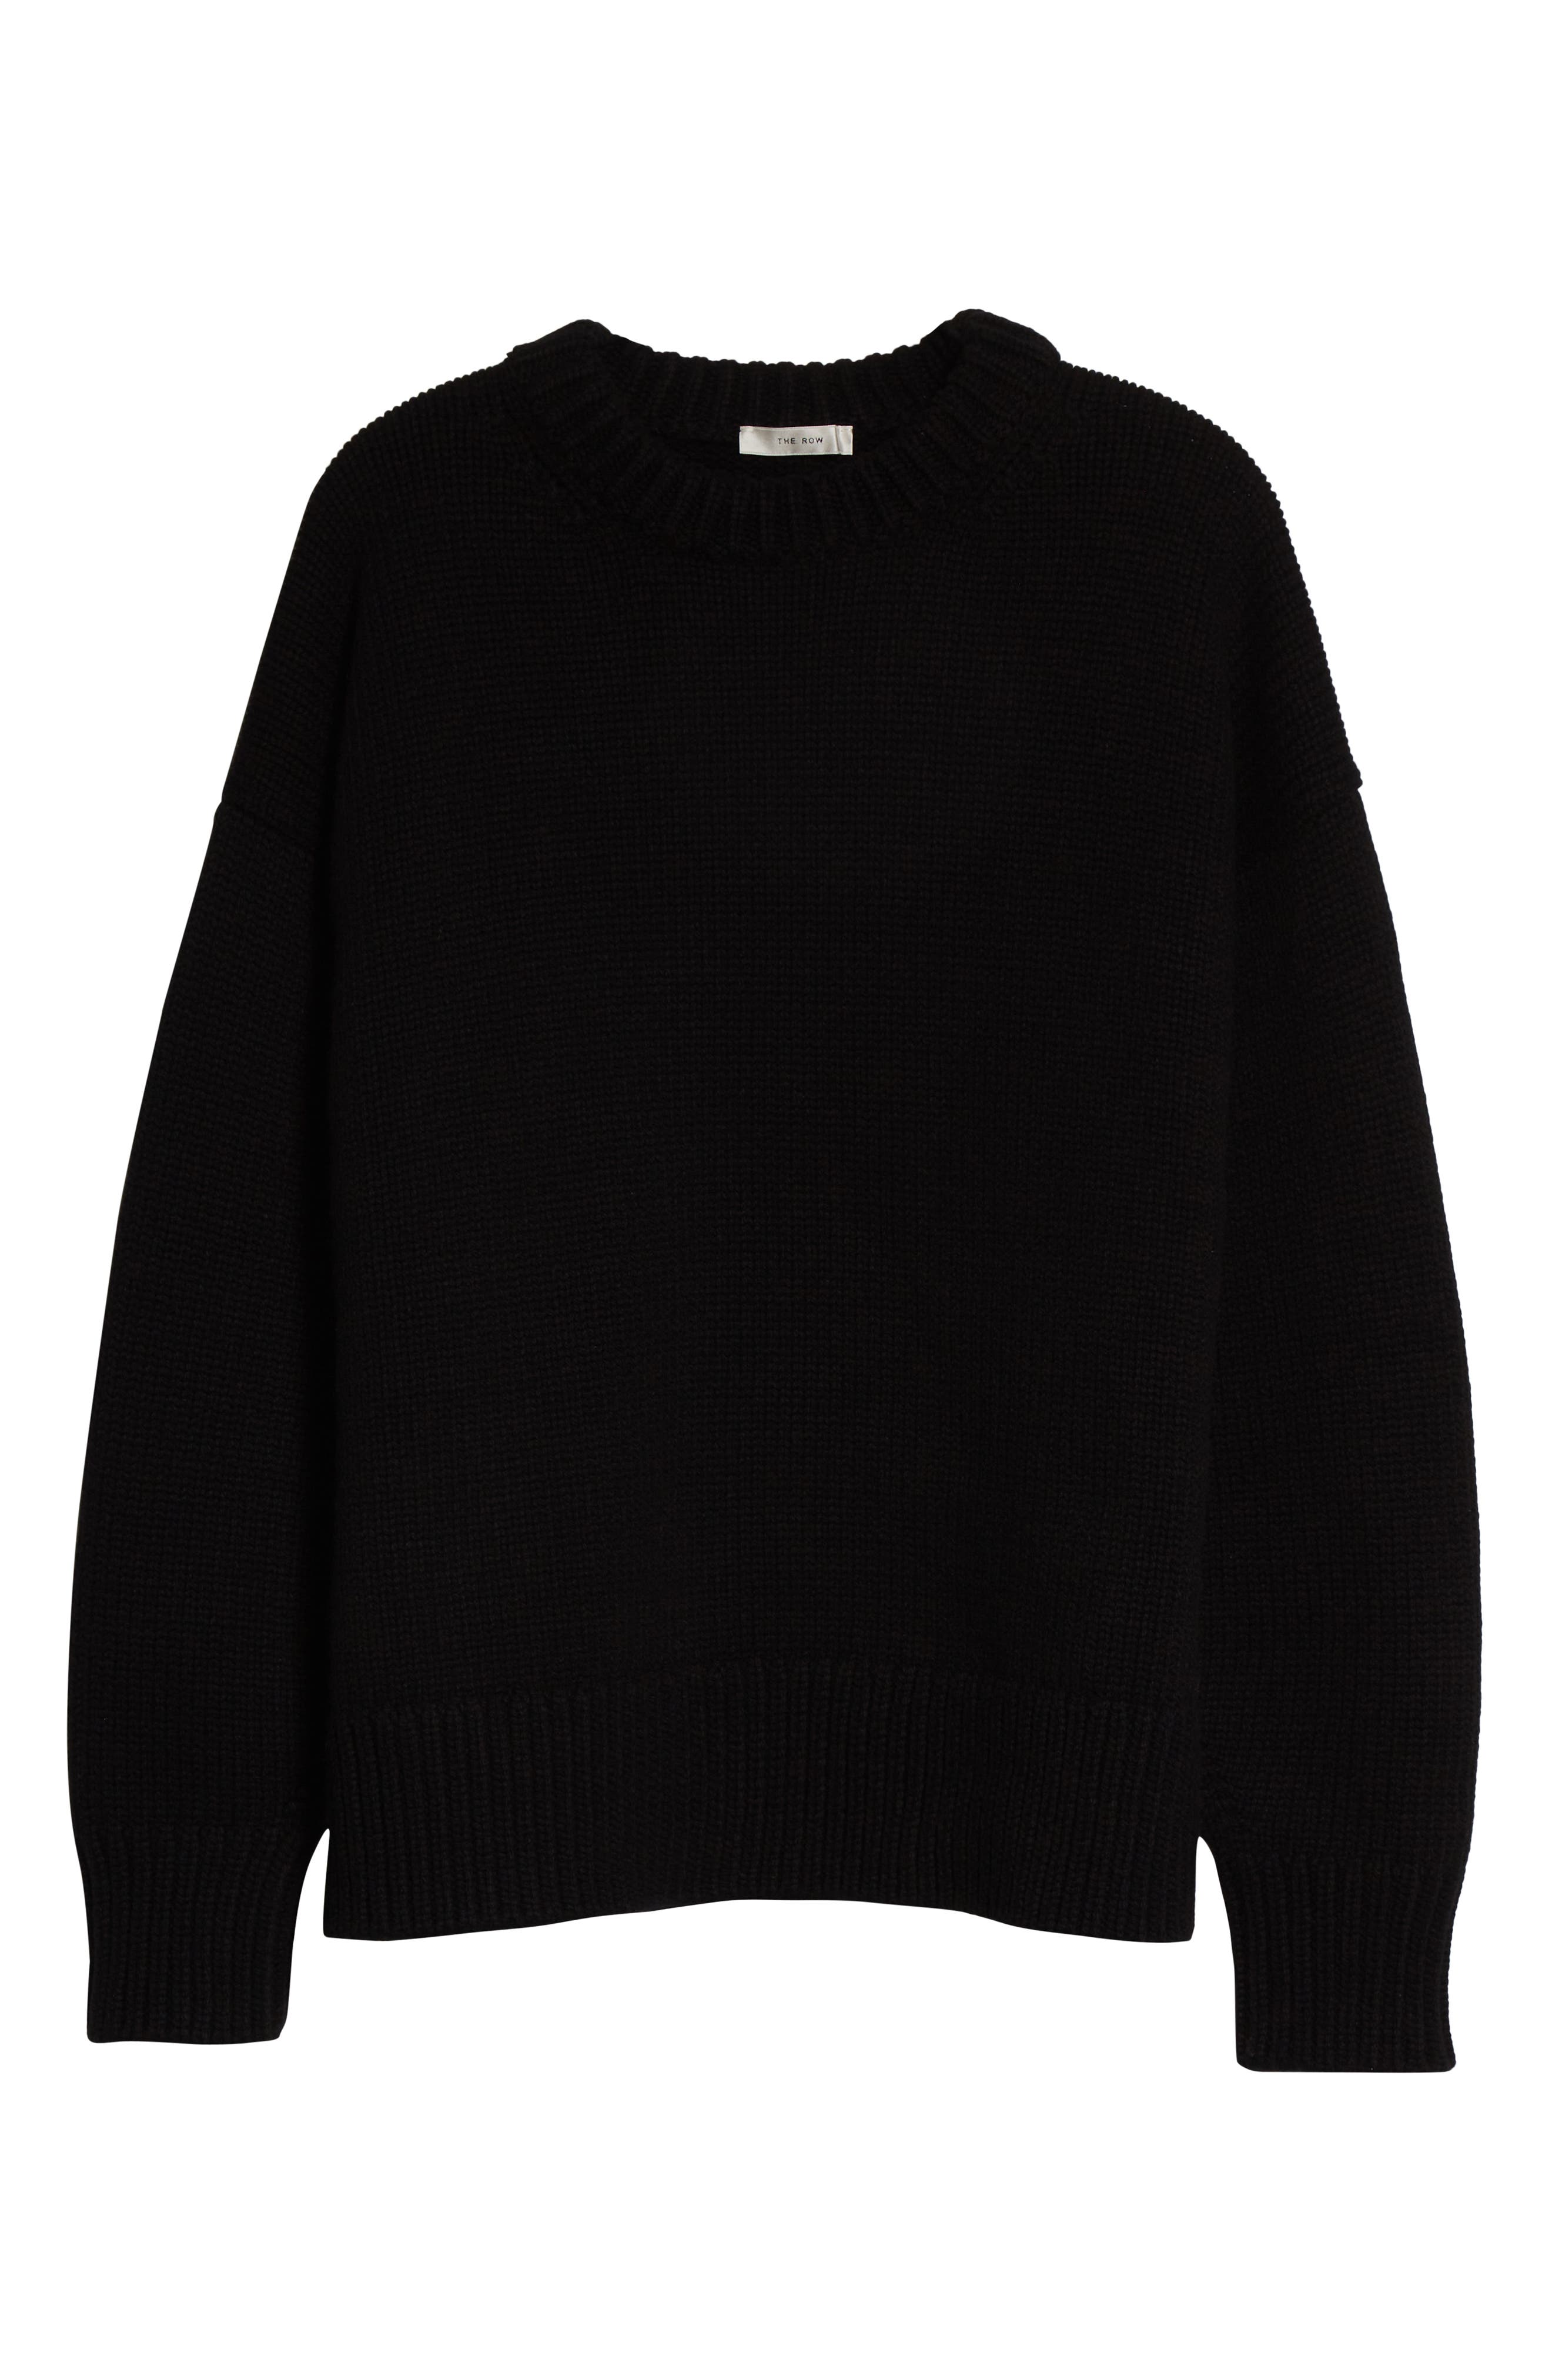 The Row Ophelia Oversize Crewneck Wool & Cashmere Sweater in Black